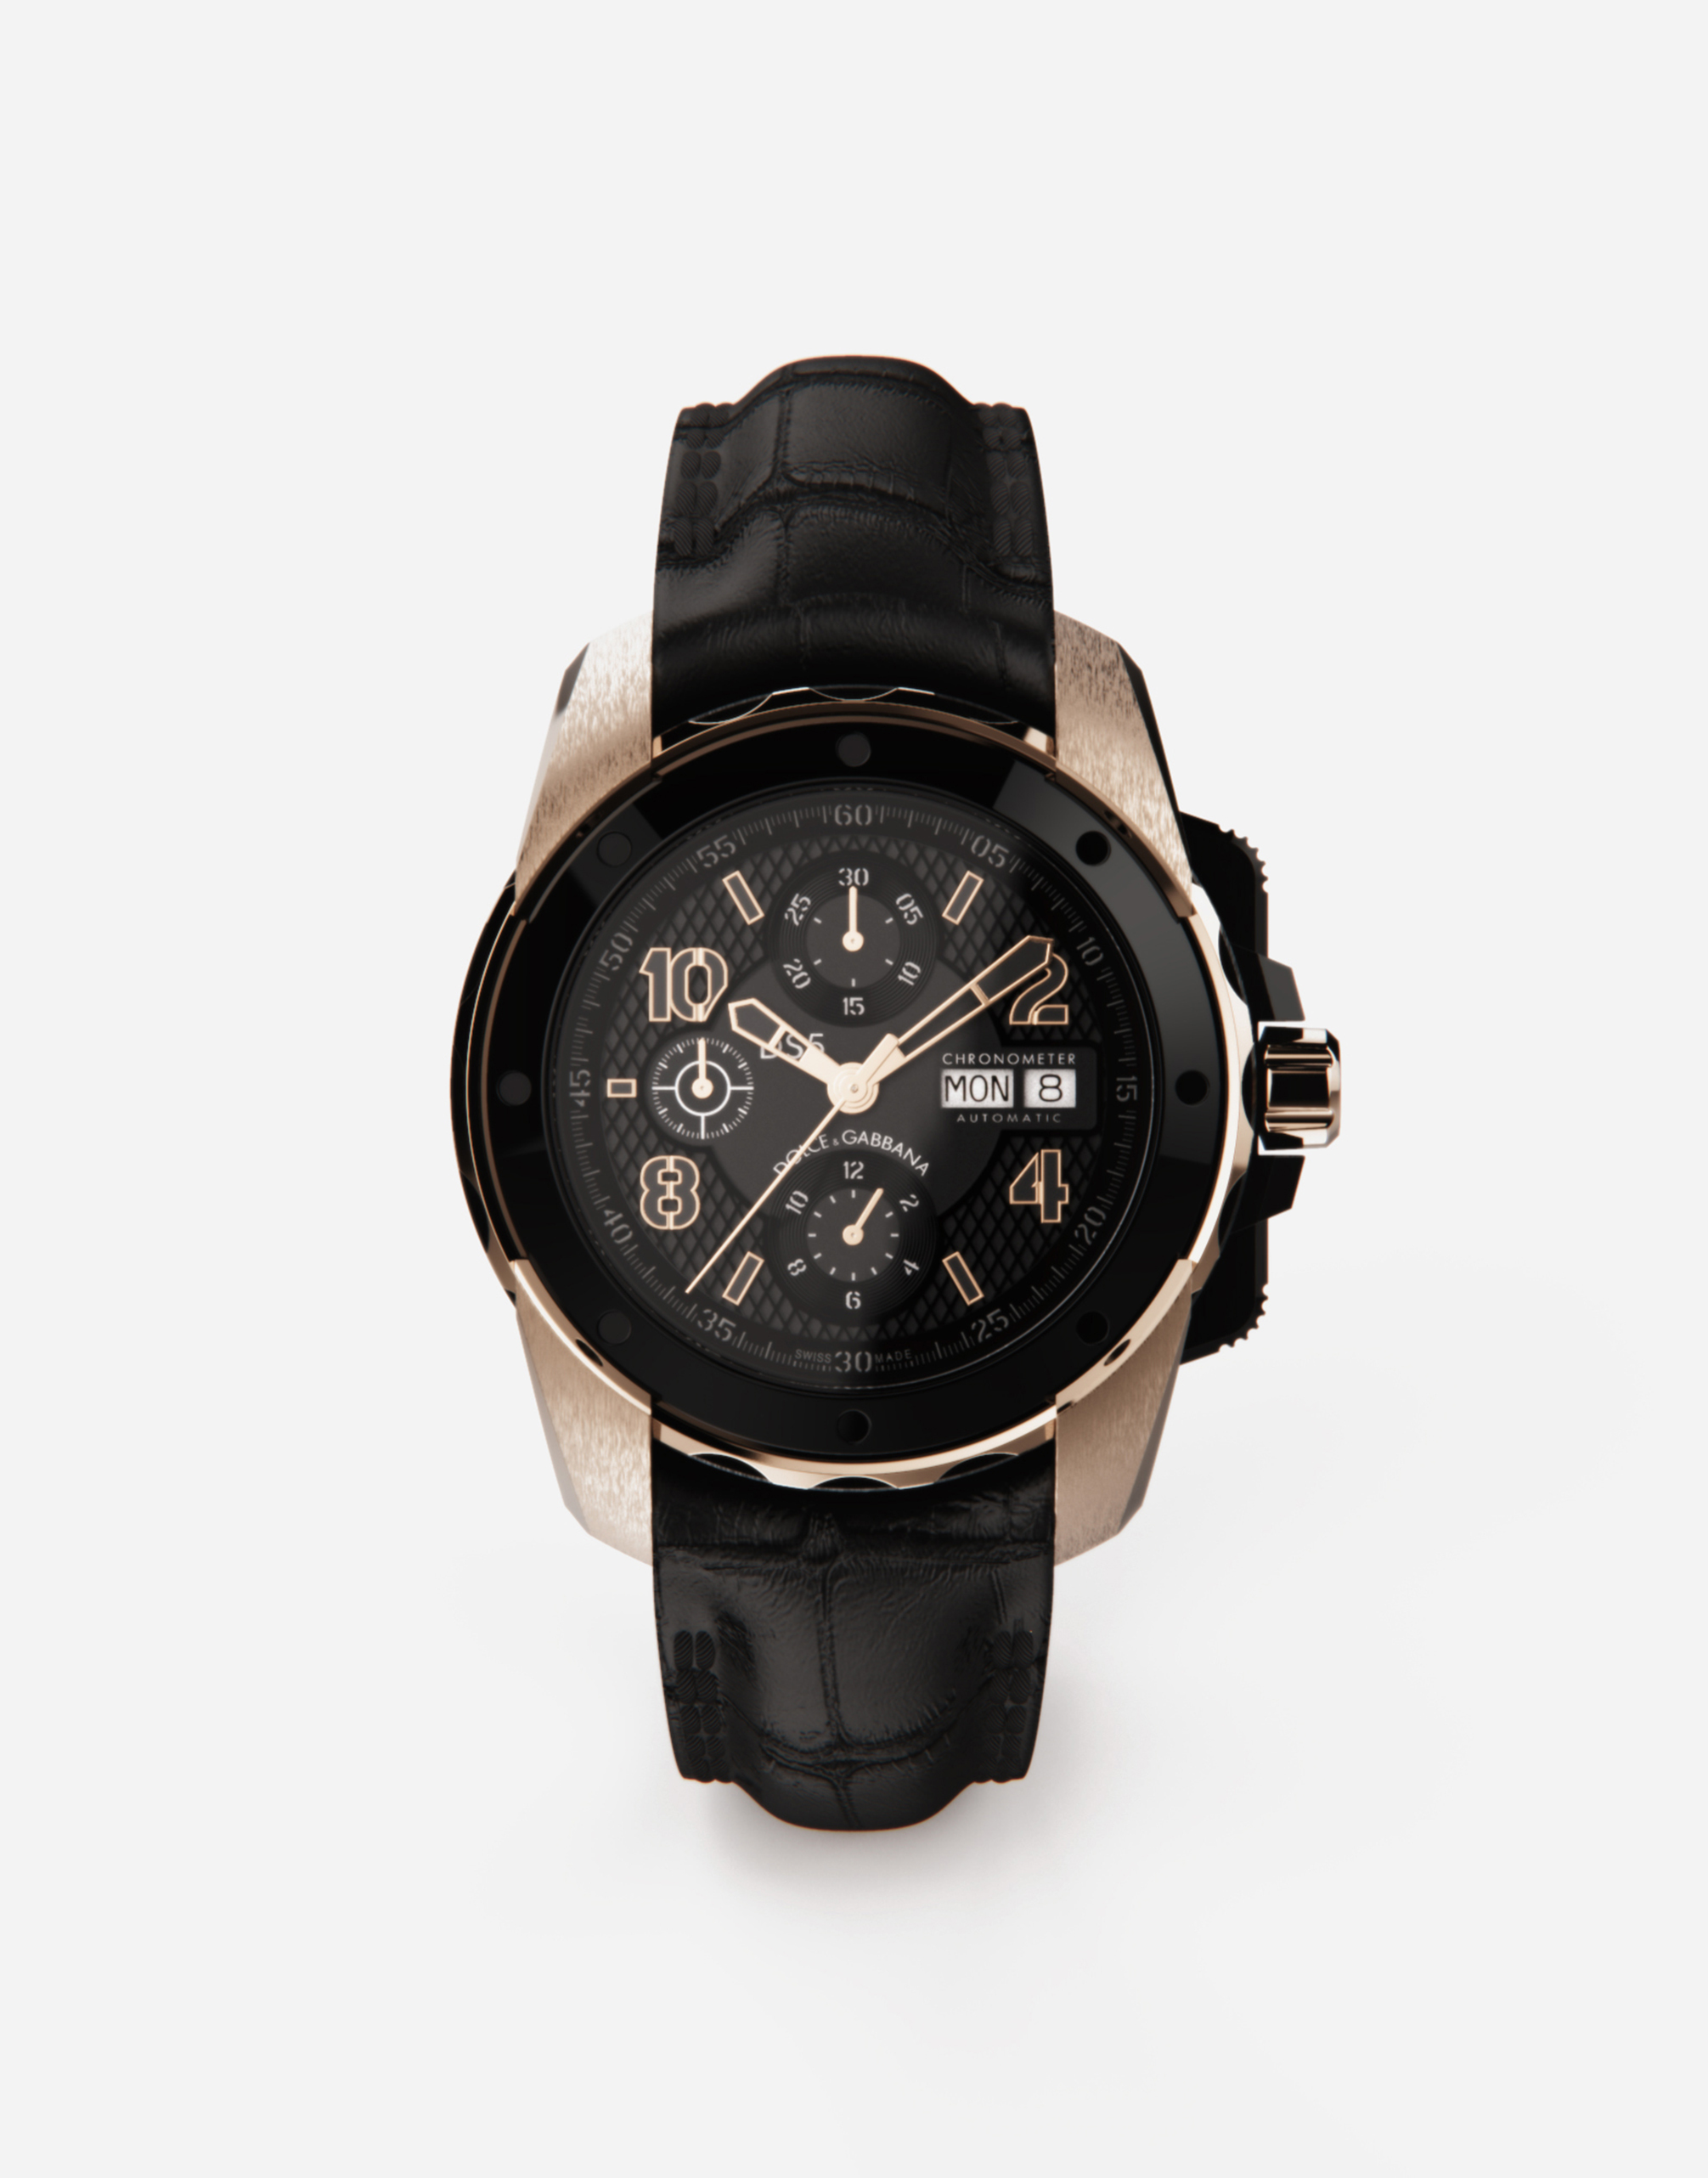 DOLCE & GABBANA DS5 WATCH IN RED GOLD AND STEEL WITH PVD COATING